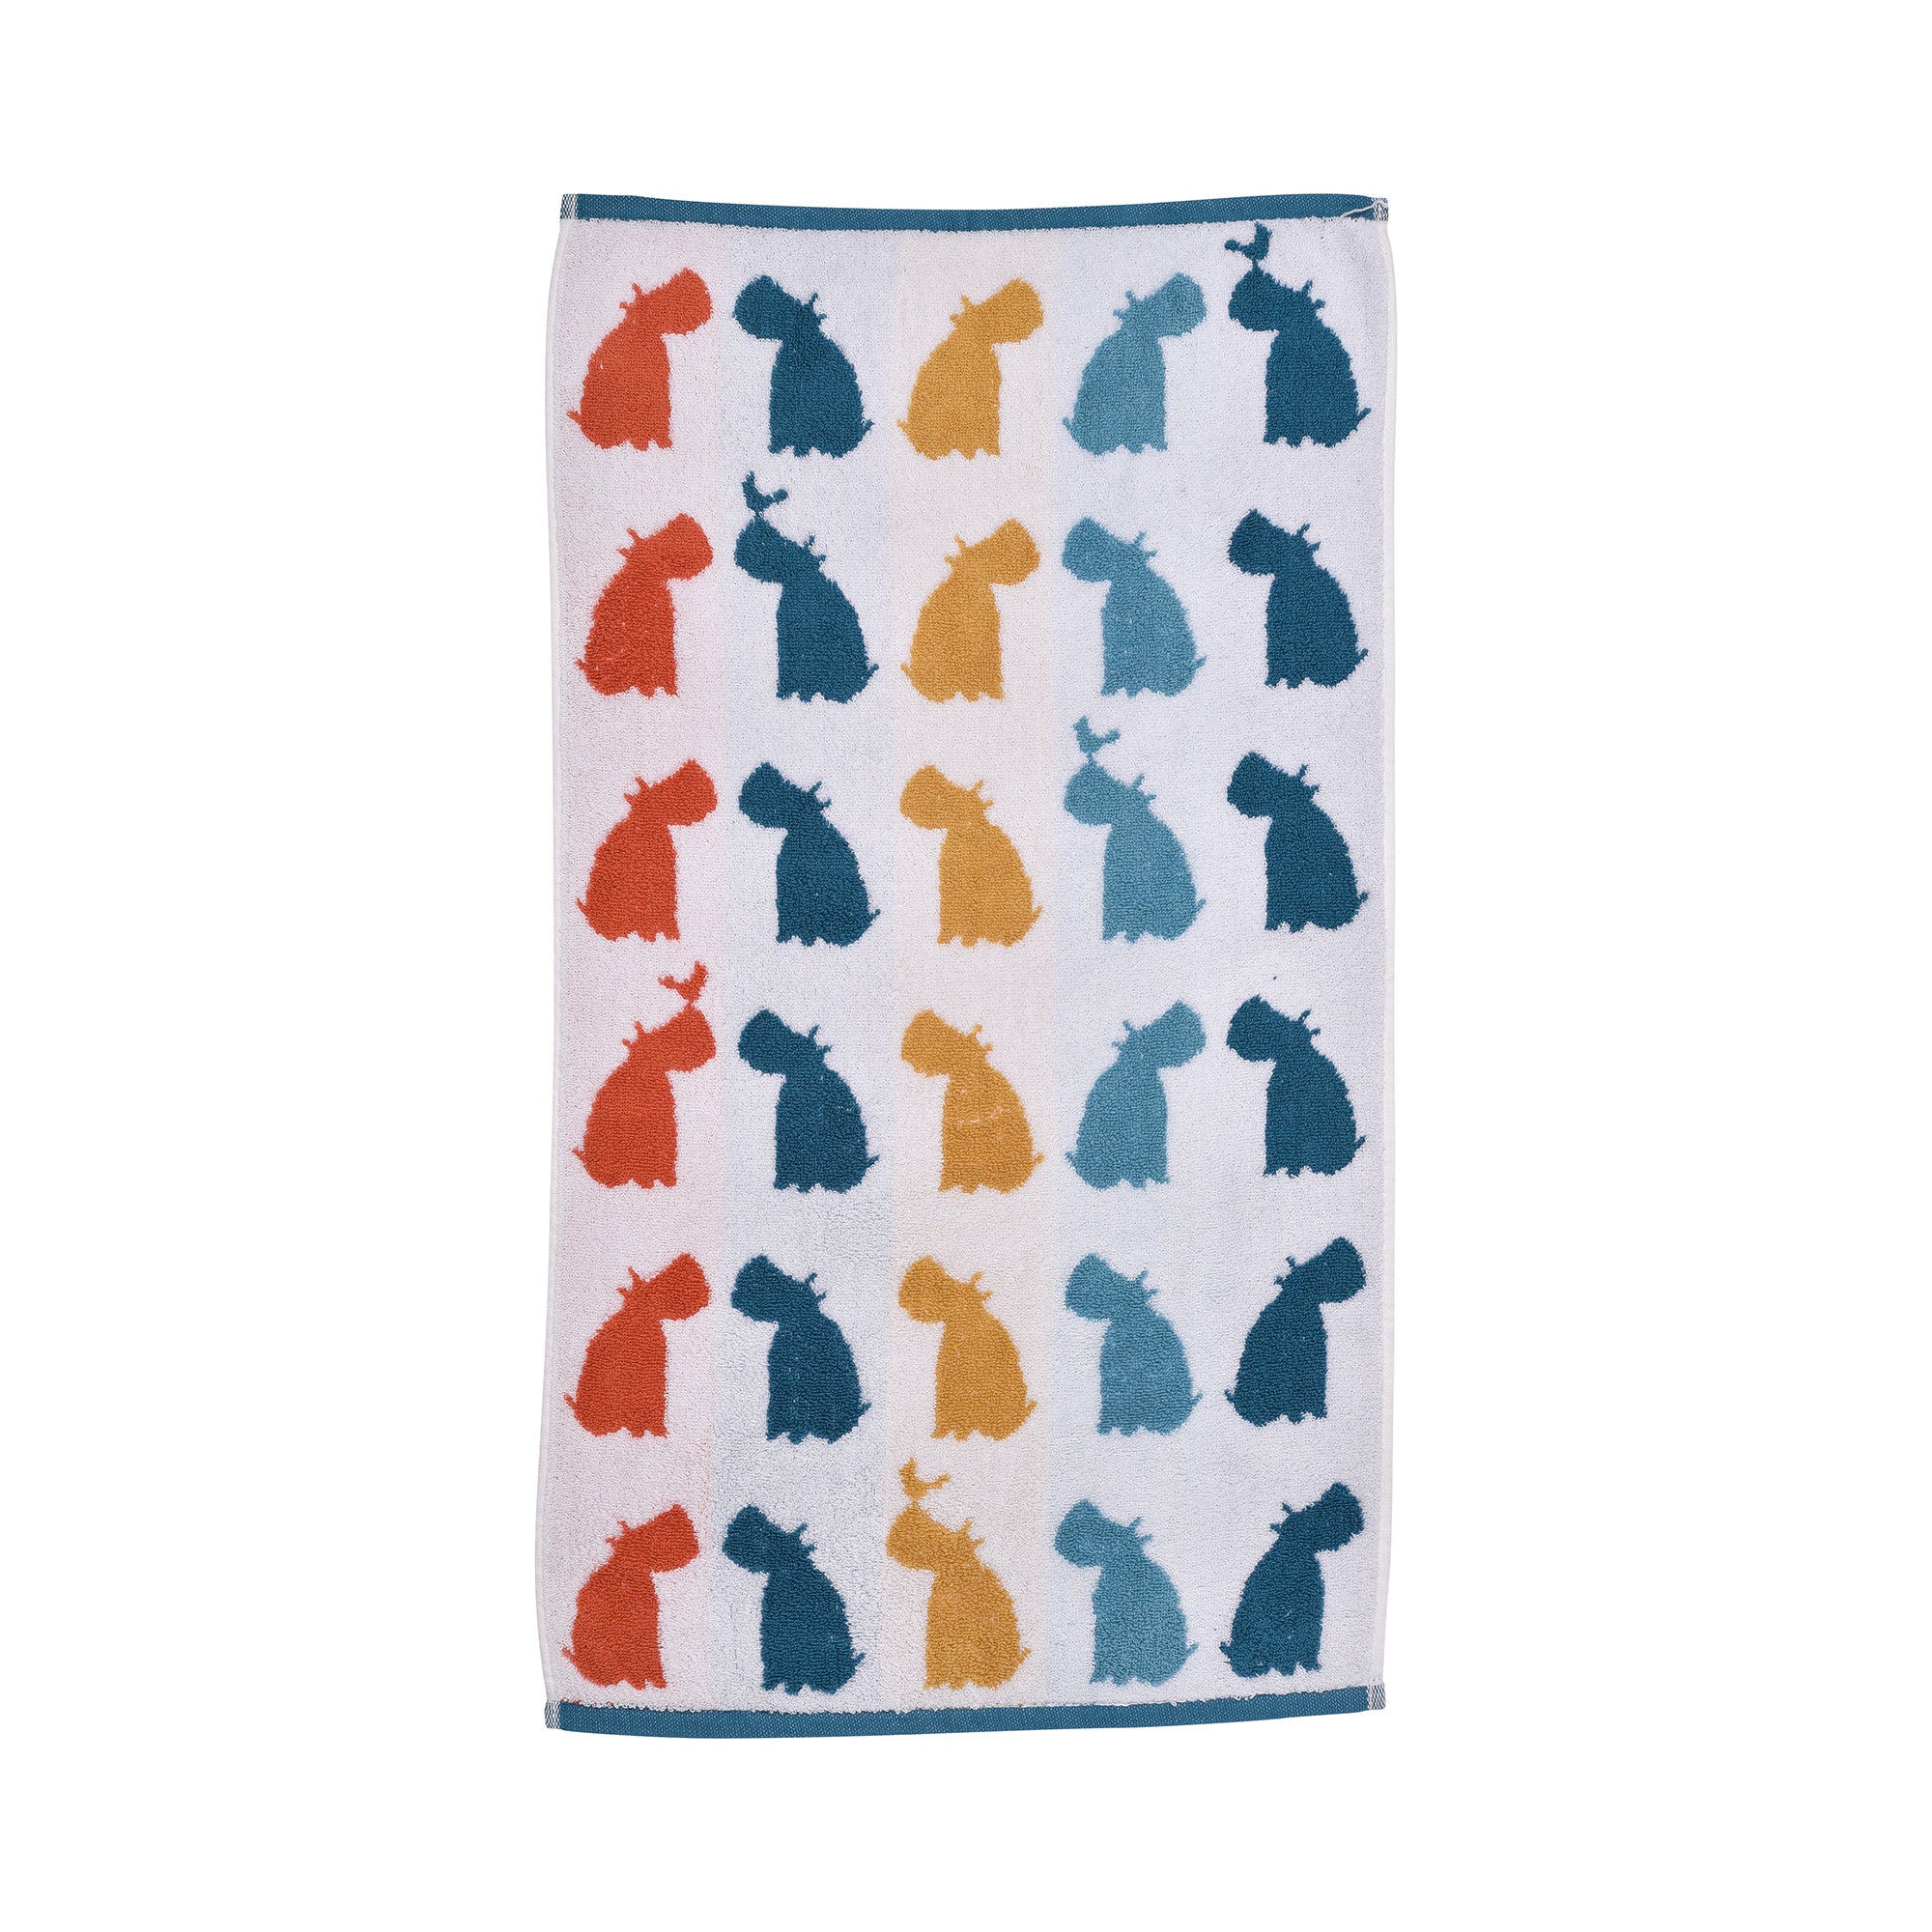 Hand Towel (2 pack) Hippo by Fusion Bathroom in Multi